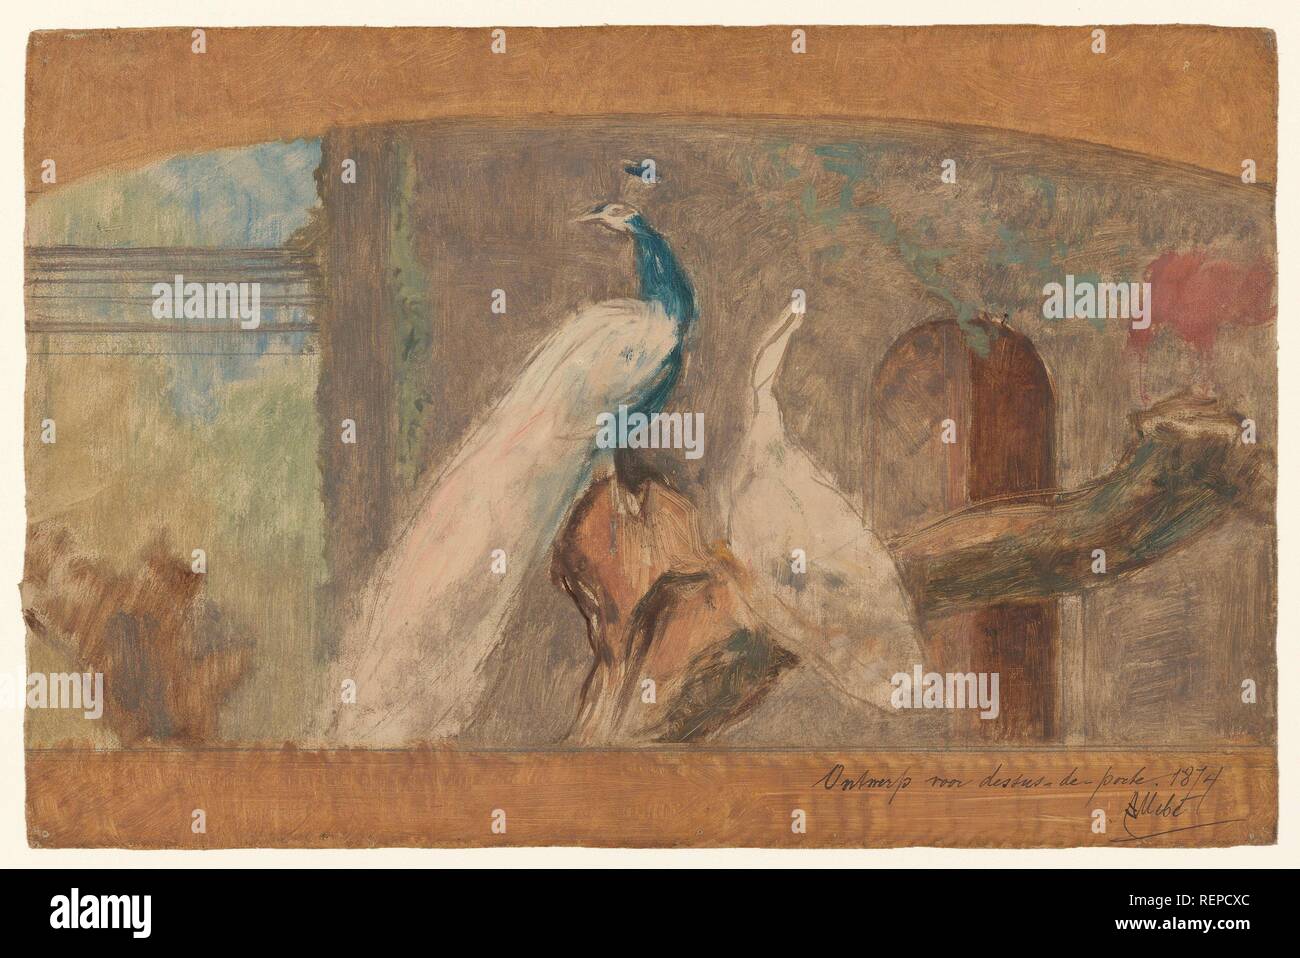 Design for a dessus de porte: branch with peacock and other birds. Draughtsman: August Allebé. Dating: 1874. Measurements: h 248 mm × w 378 mm. Museum: Rijksmuseum, Amsterdam. Stock Photo